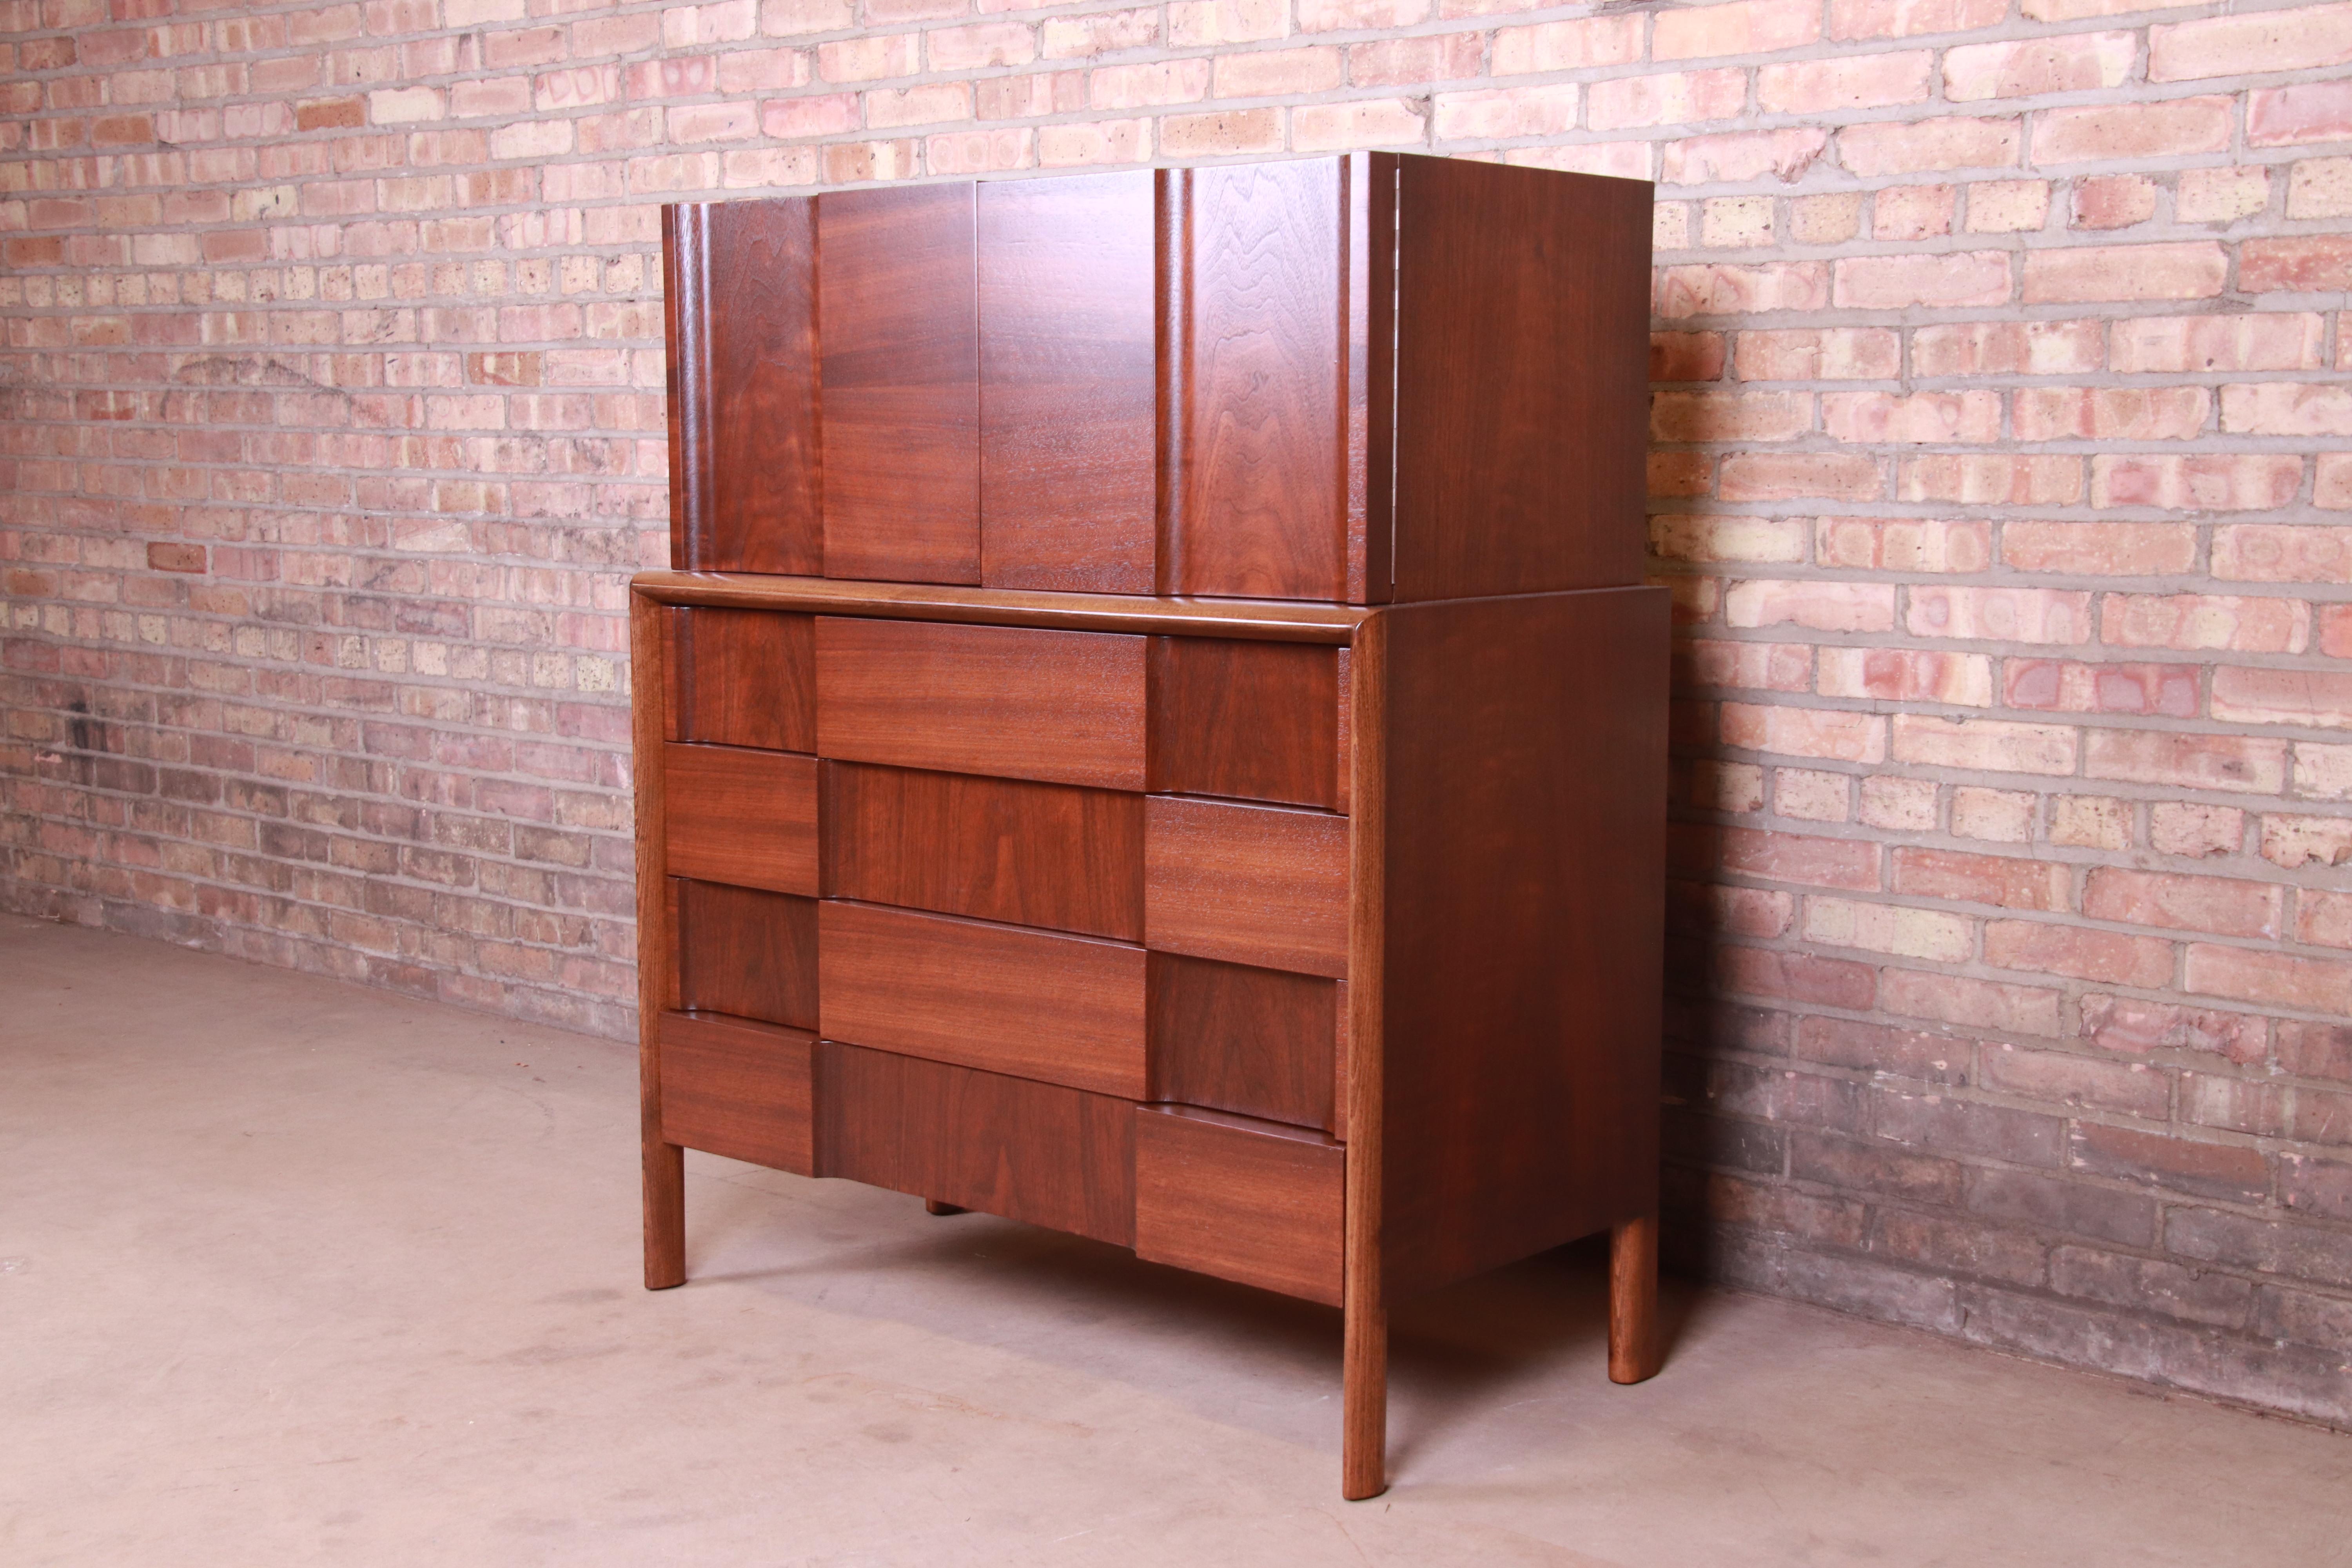 An exceptional midcentury Swedish Modern sculpted walnut 